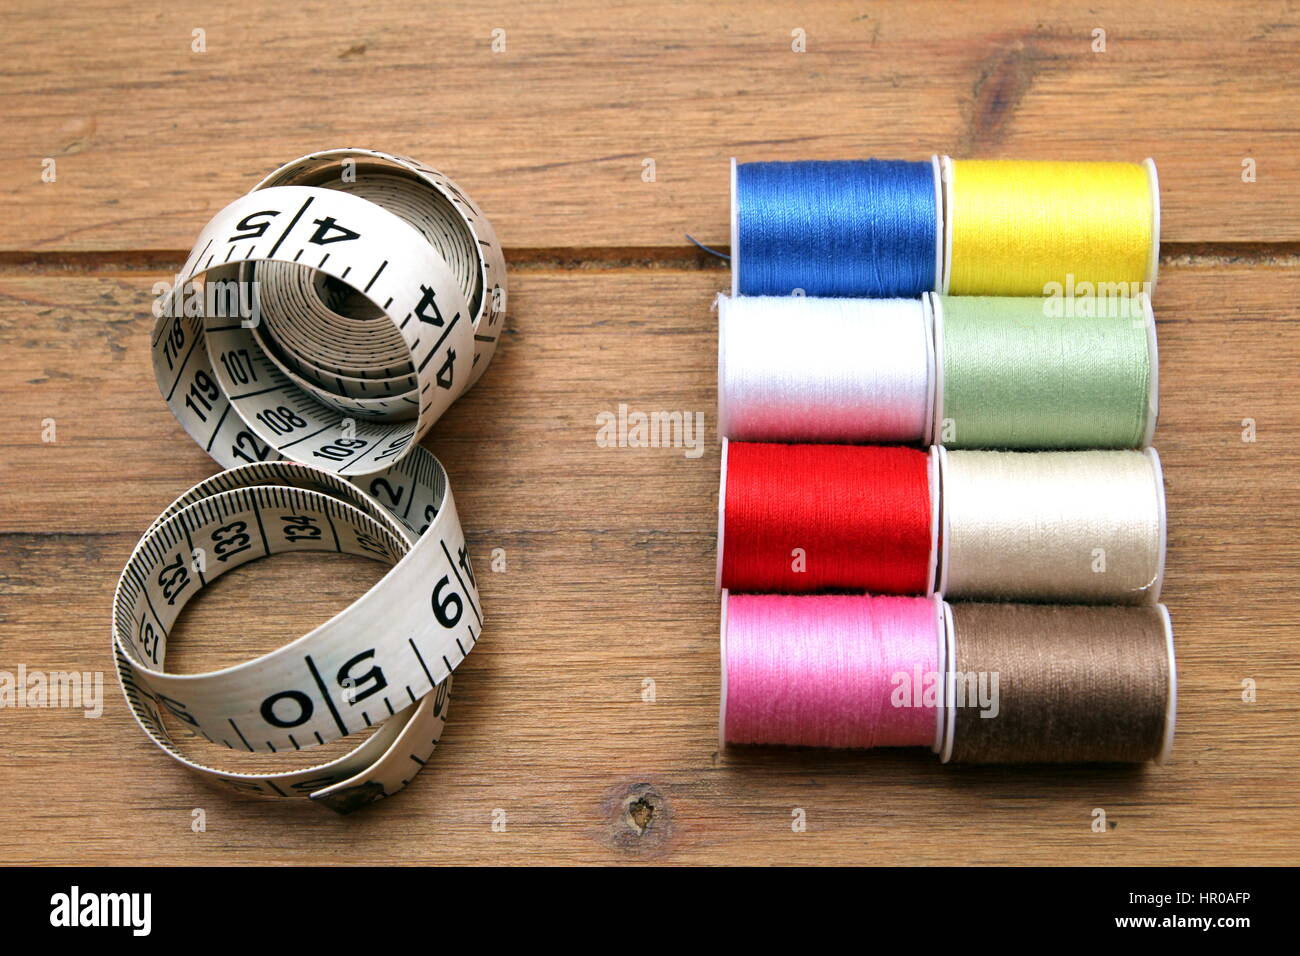 https://c8.alamy.com/comp/HR0AFP/multi-colored-cotton-reels-and-tape-measure-on-a-wooden-sewing-table-HR0AFP.jpg